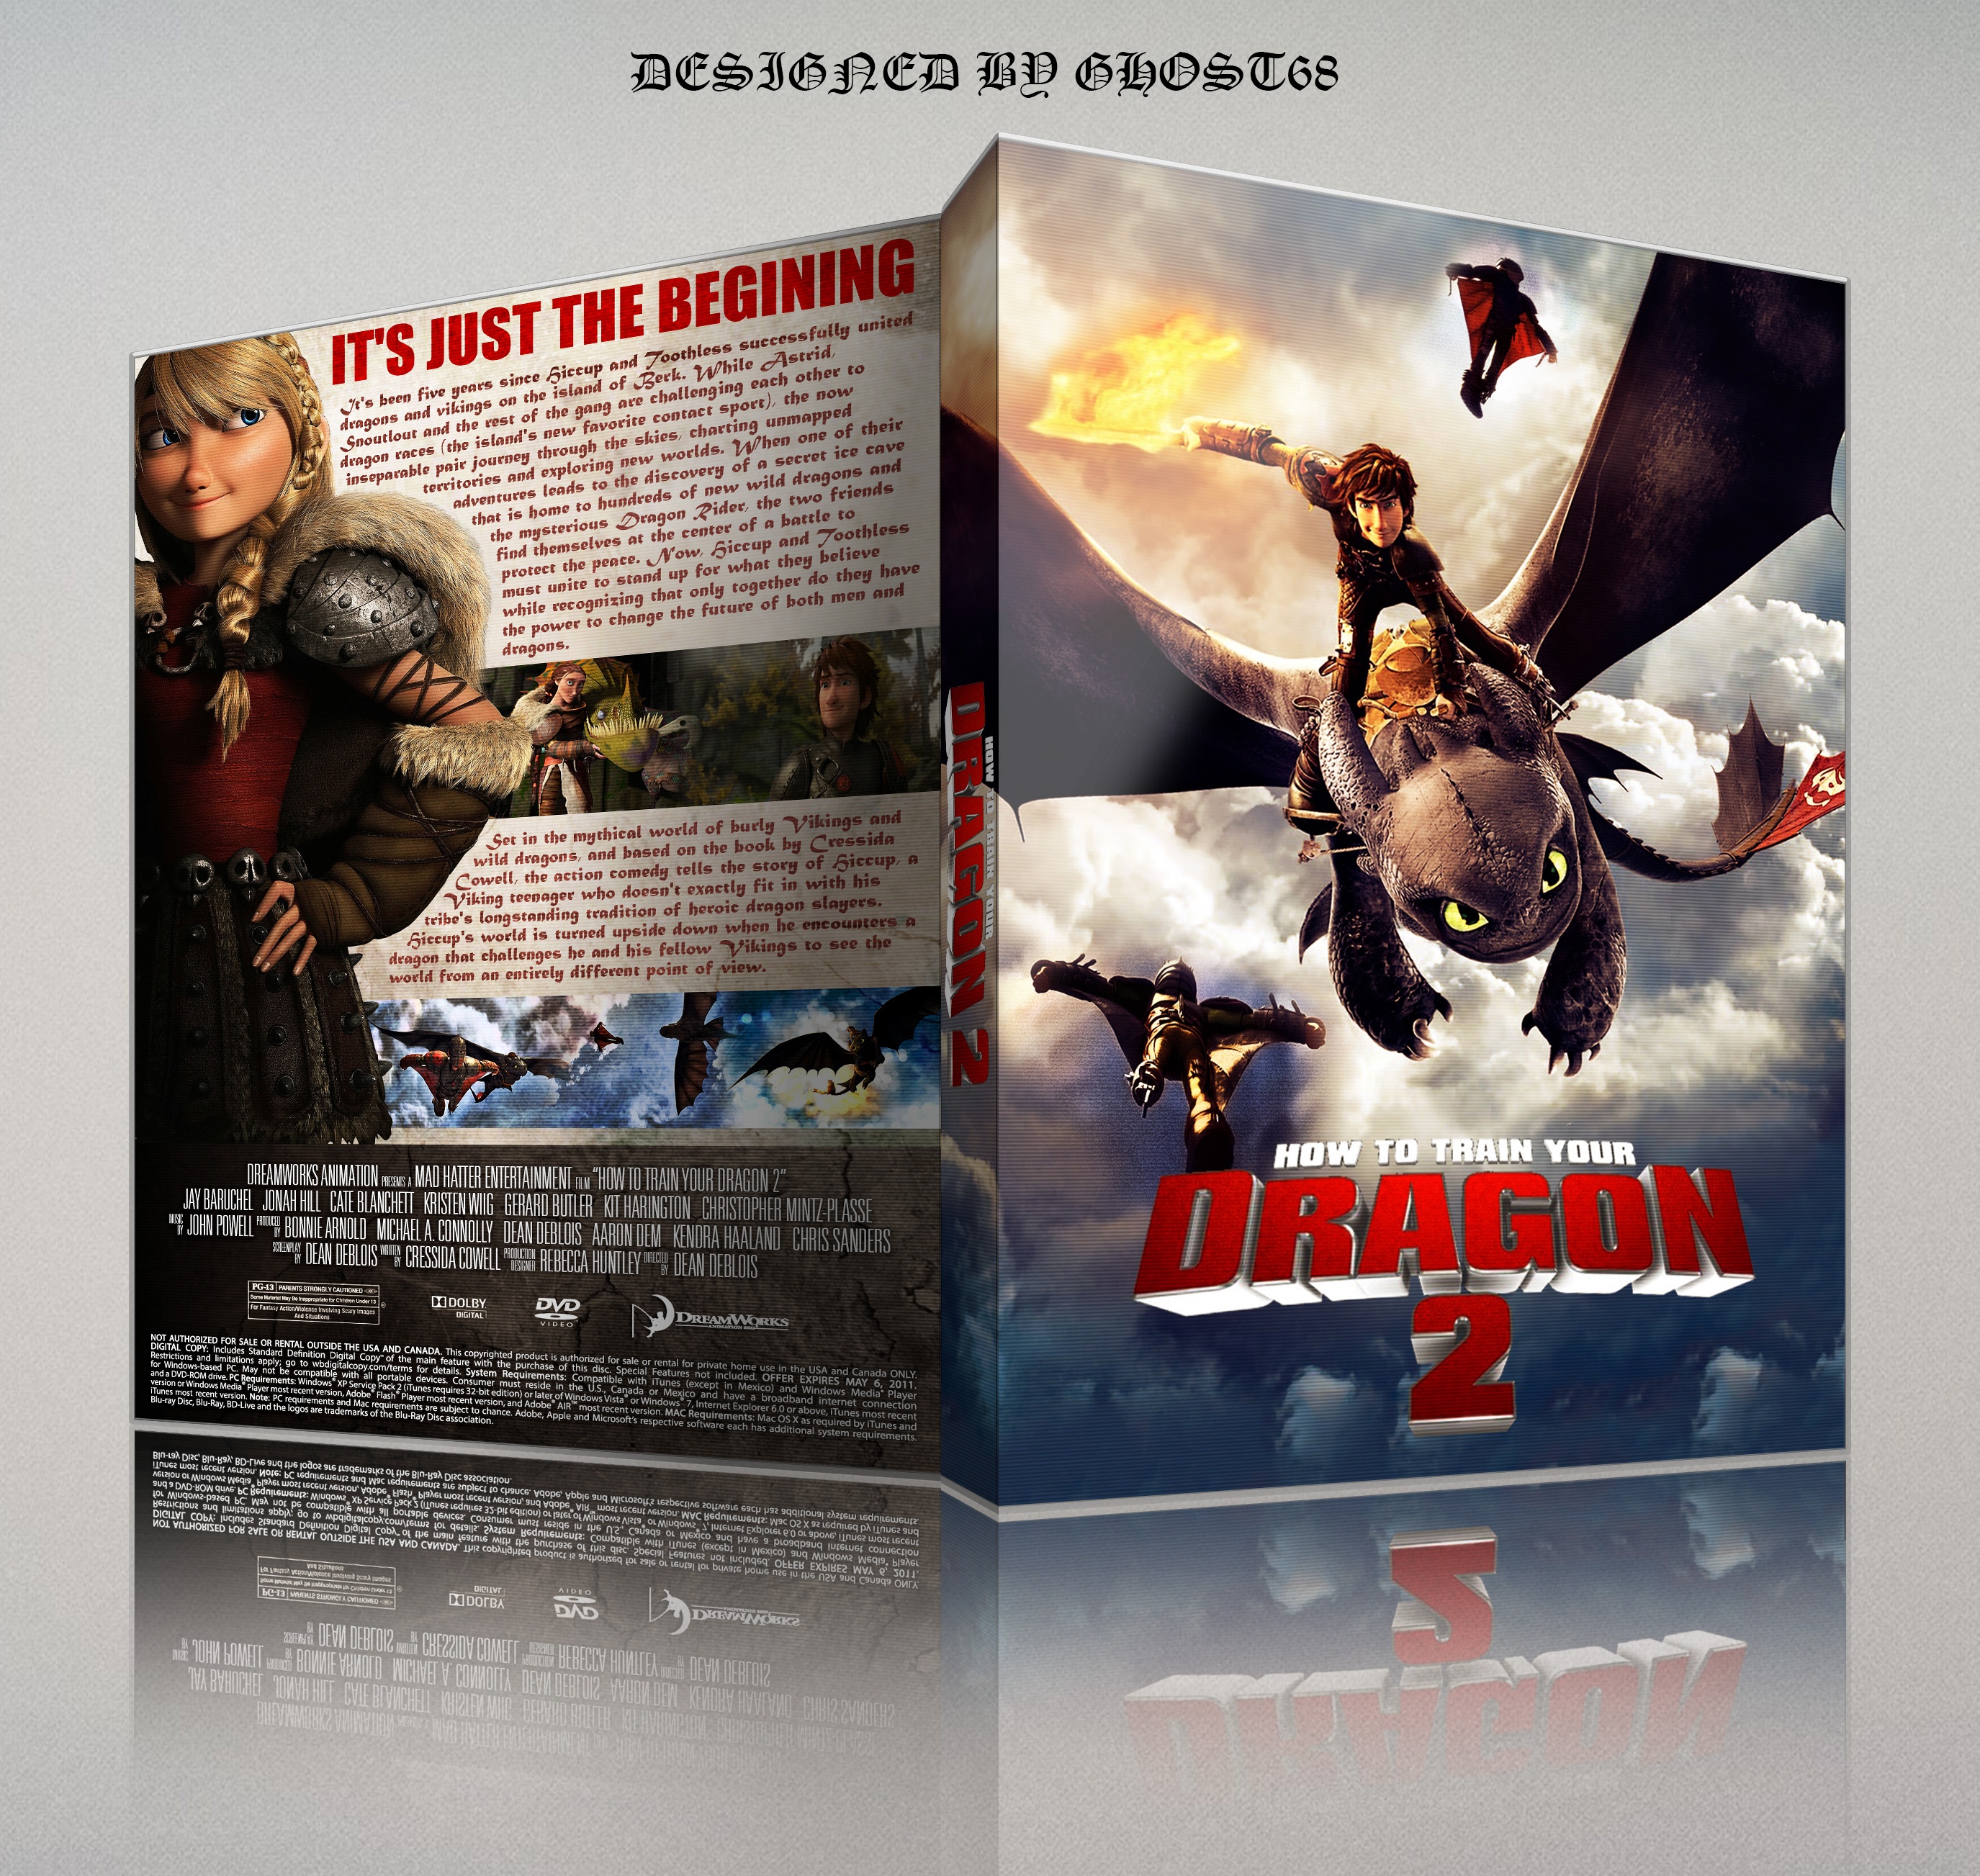 How To Train Your Dragon 2 box cover